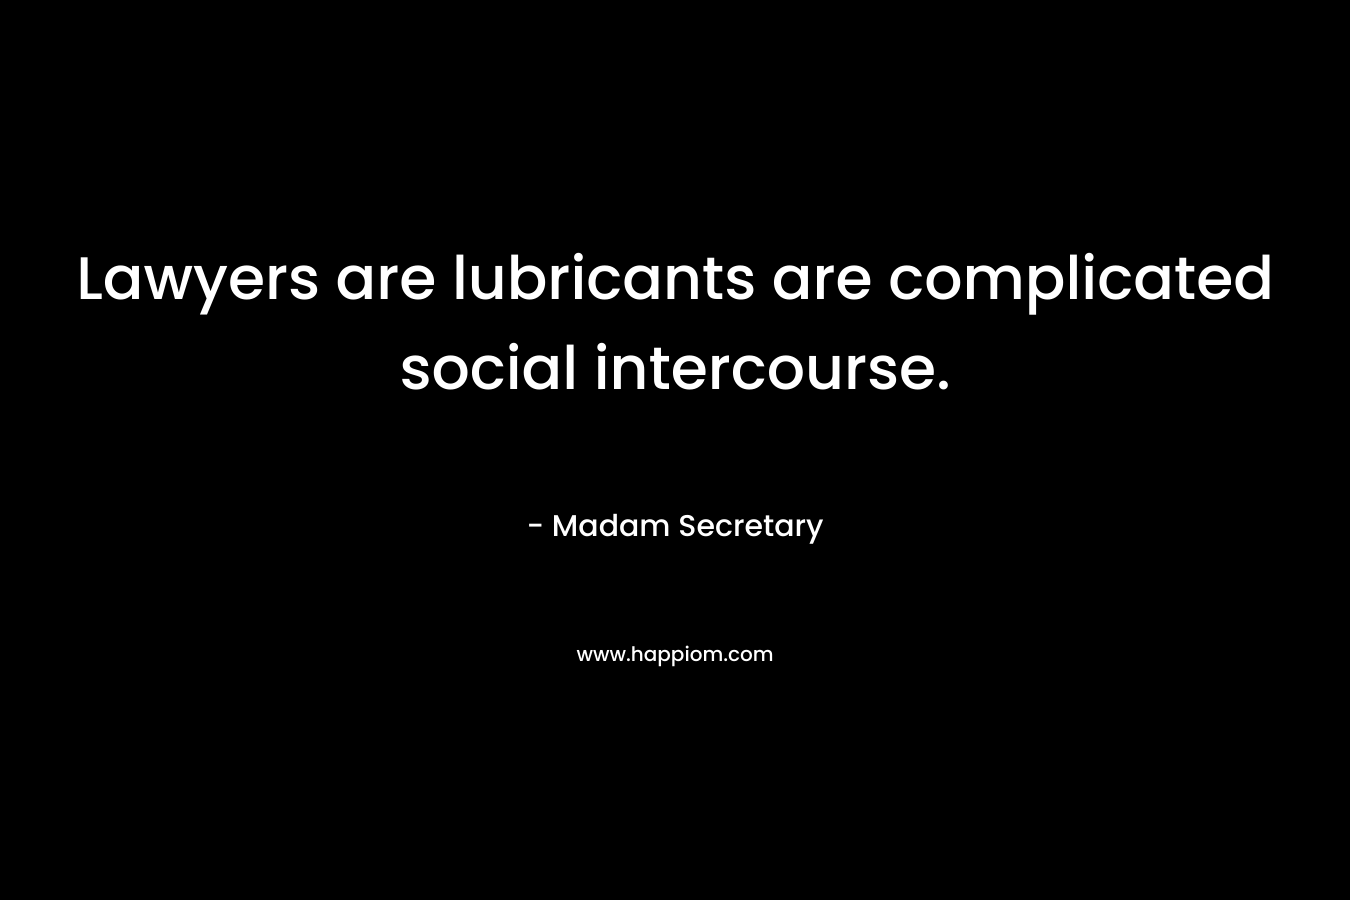 Lawyers are lubricants are complicated social intercourse. – Madam Secretary